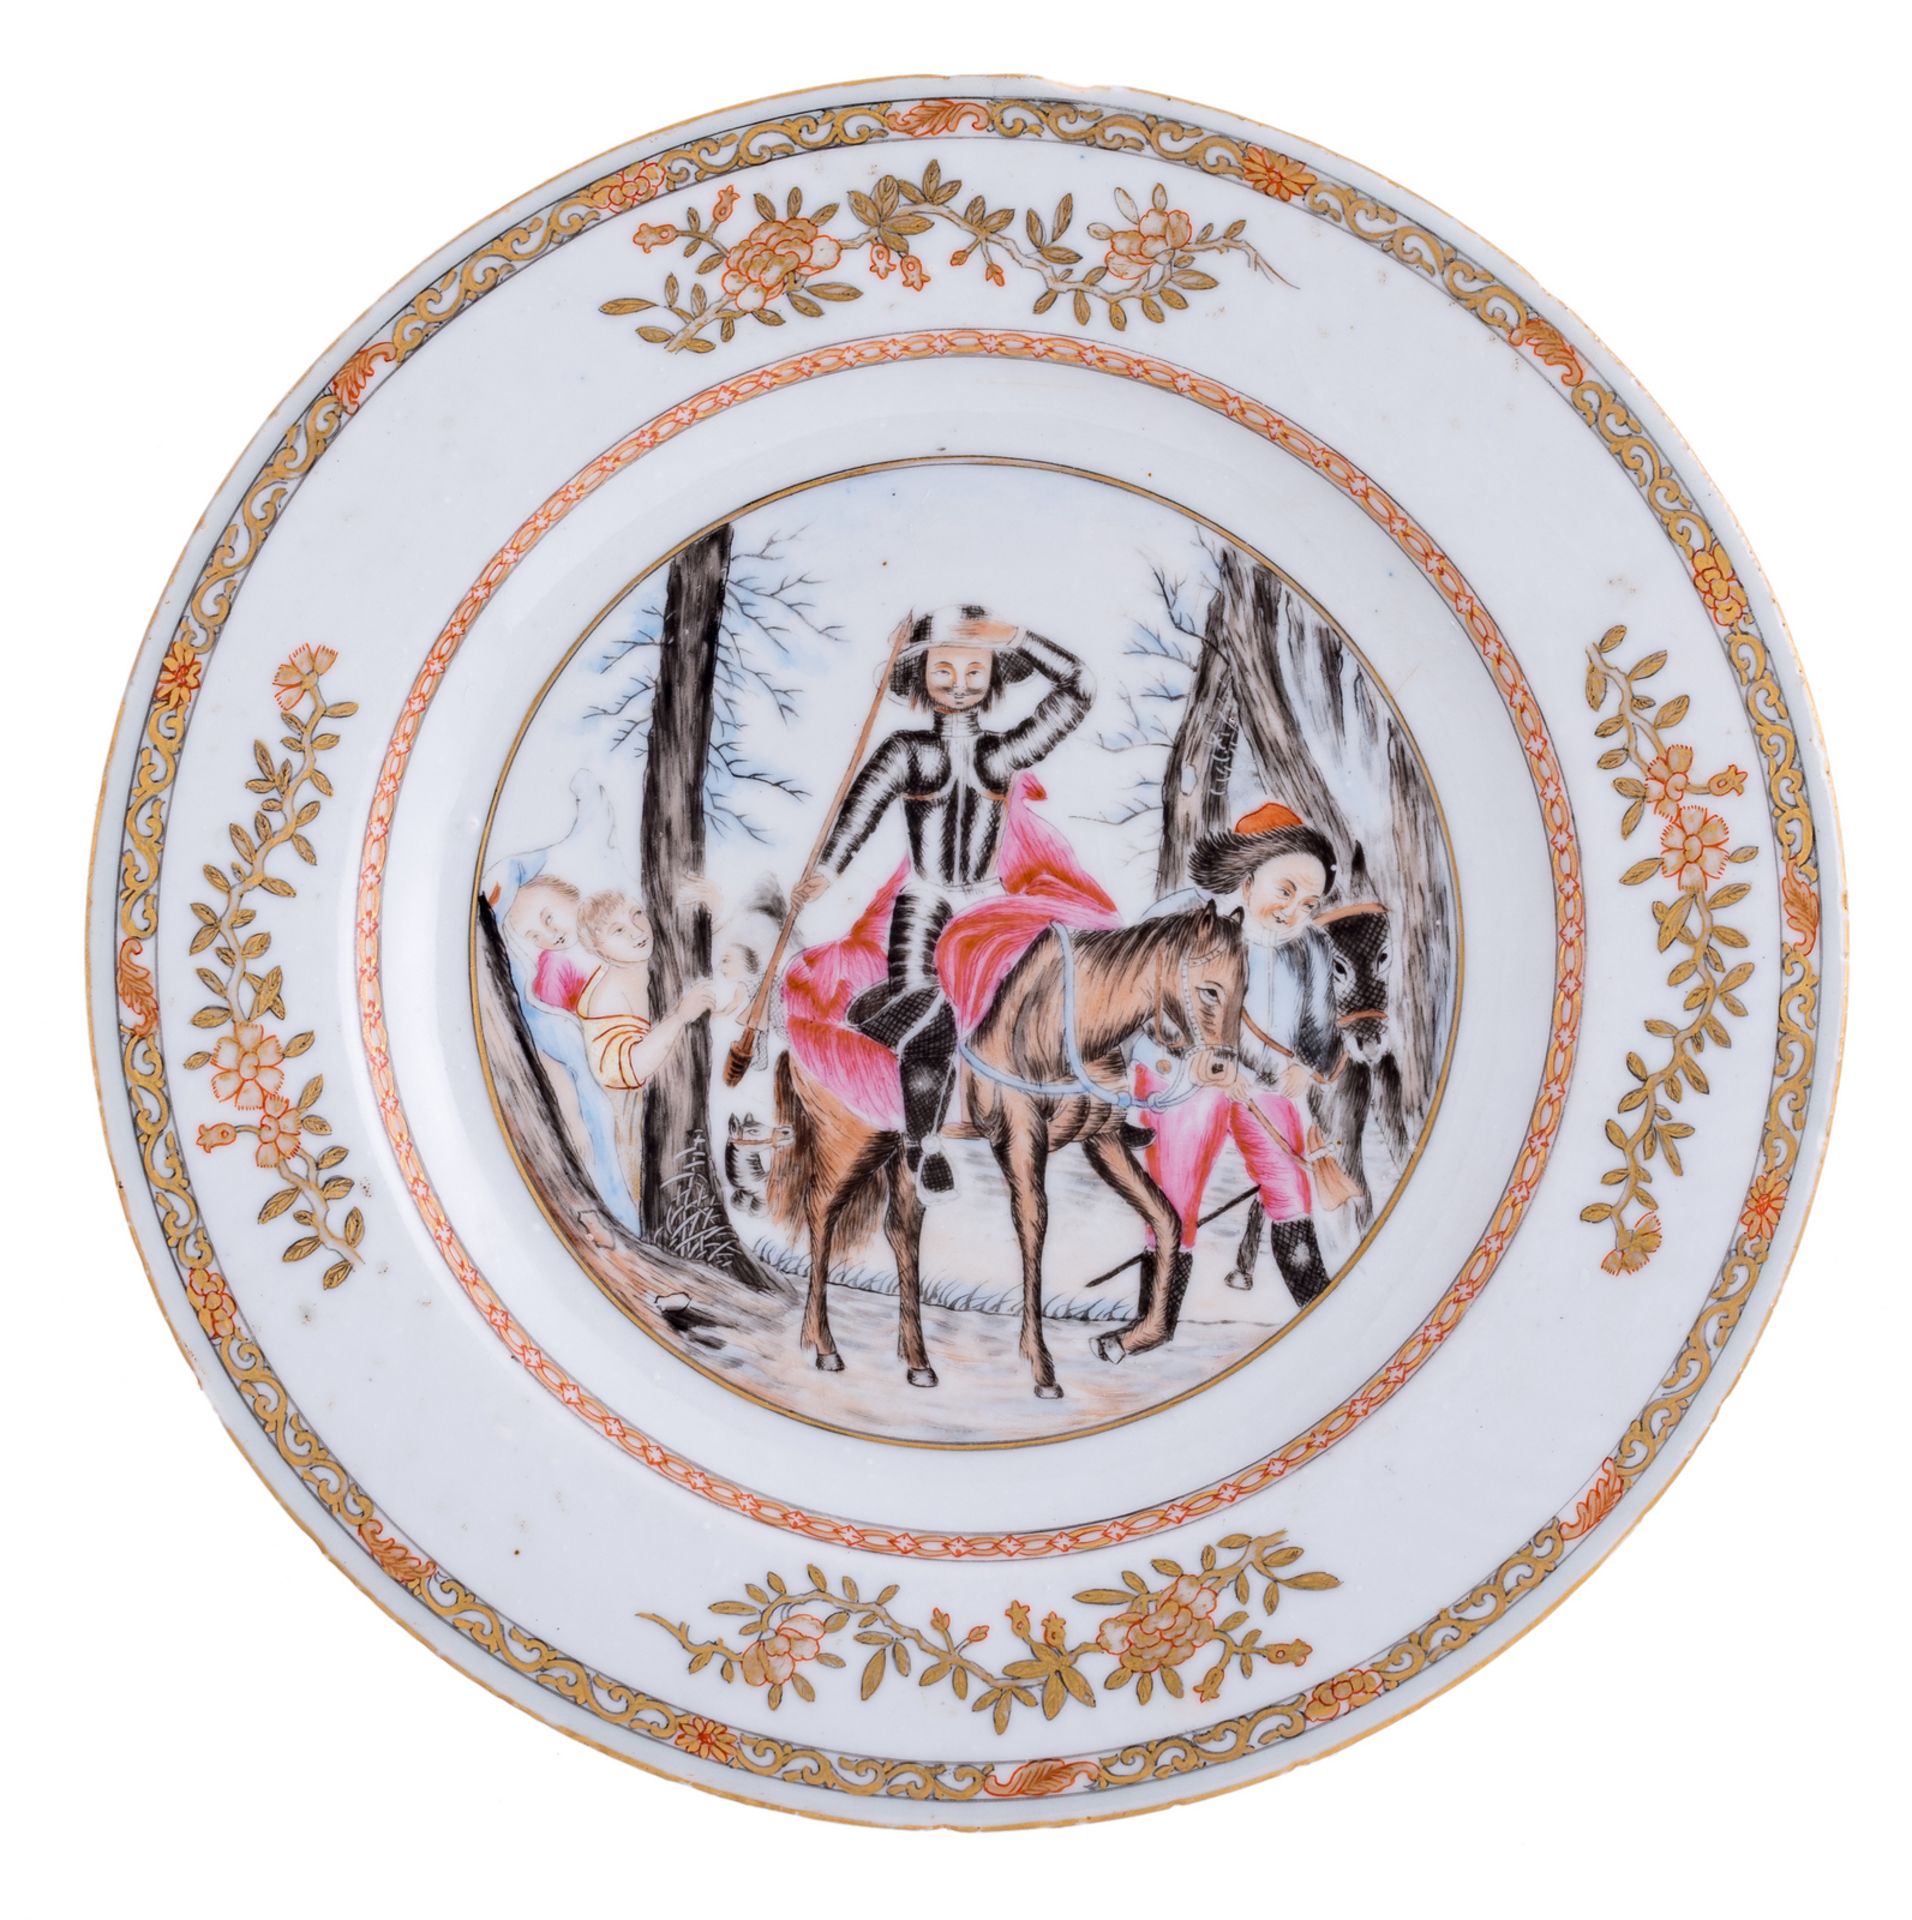 A Chinese famille rose export porcelain dish, depicting an animated scene with Don Quixote and